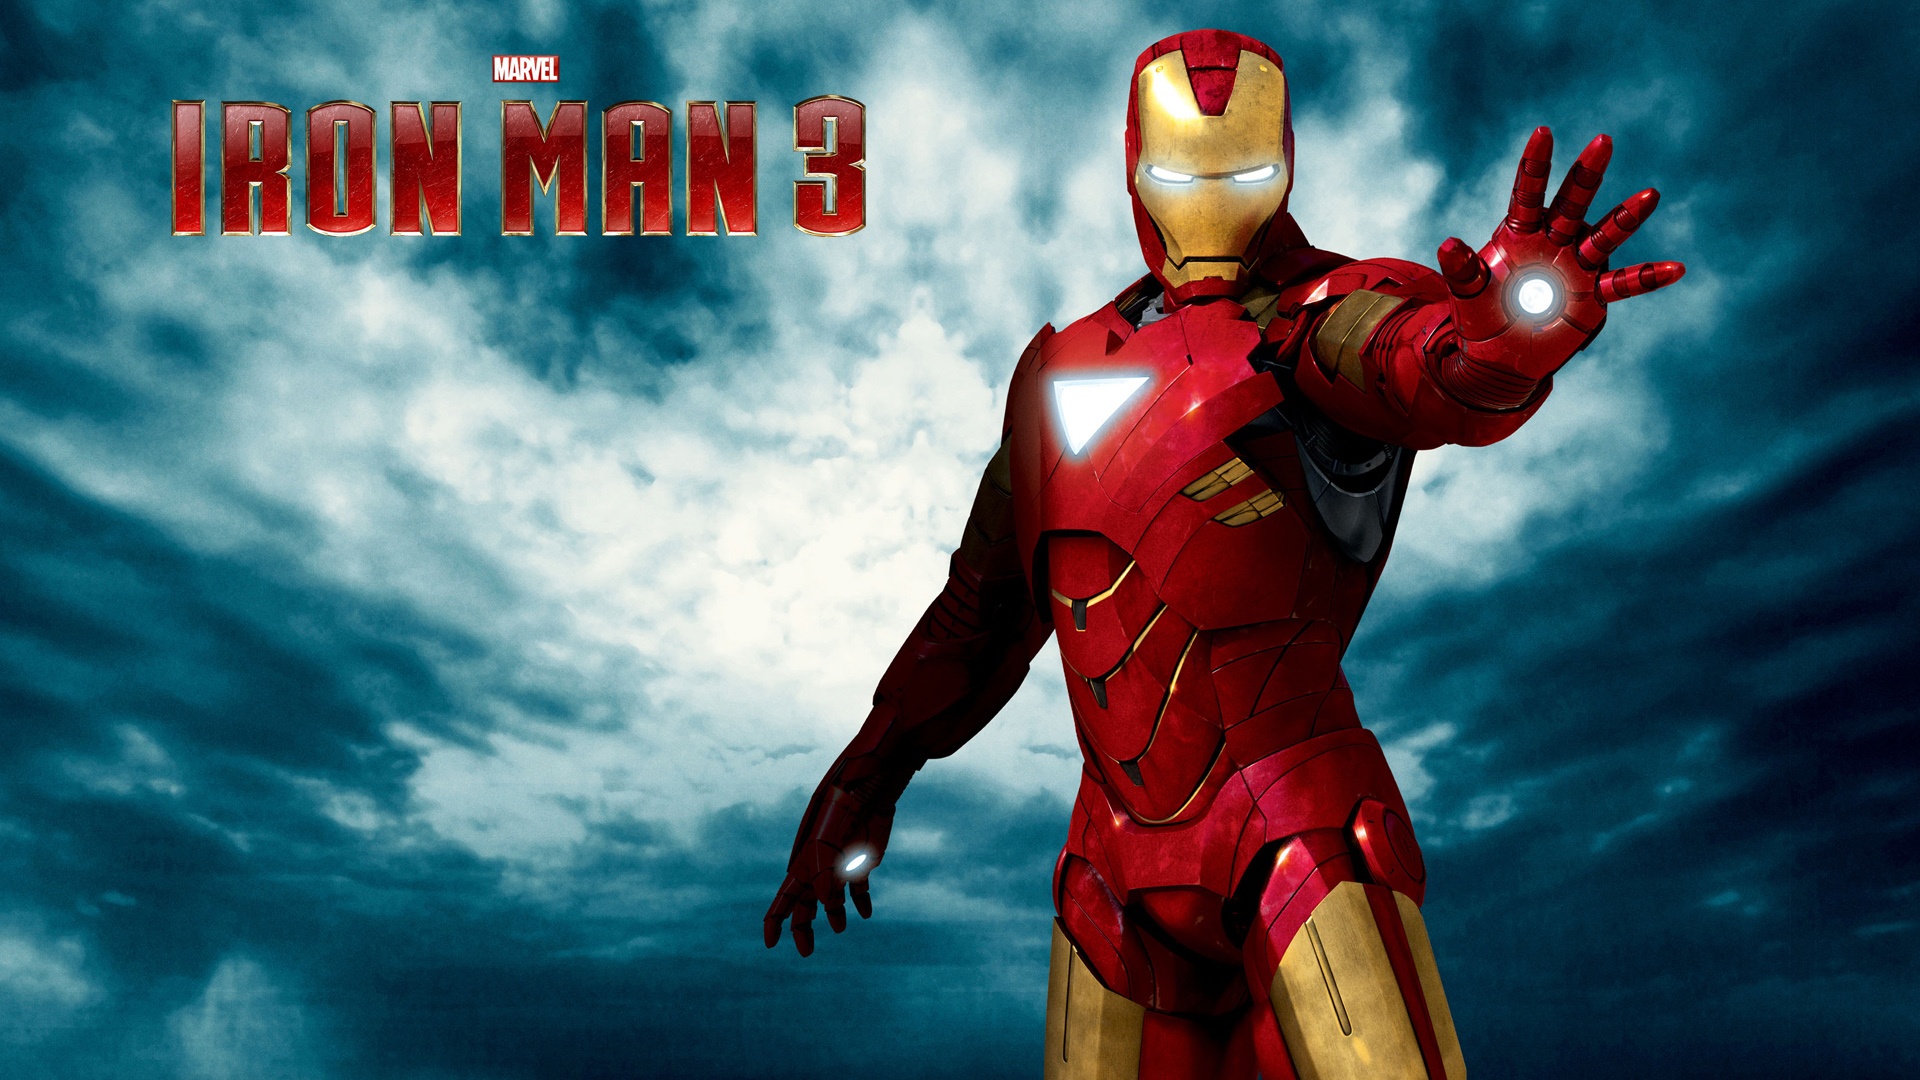 Iron Man 3 Wallpapers HD Wallpapers 1920x1080